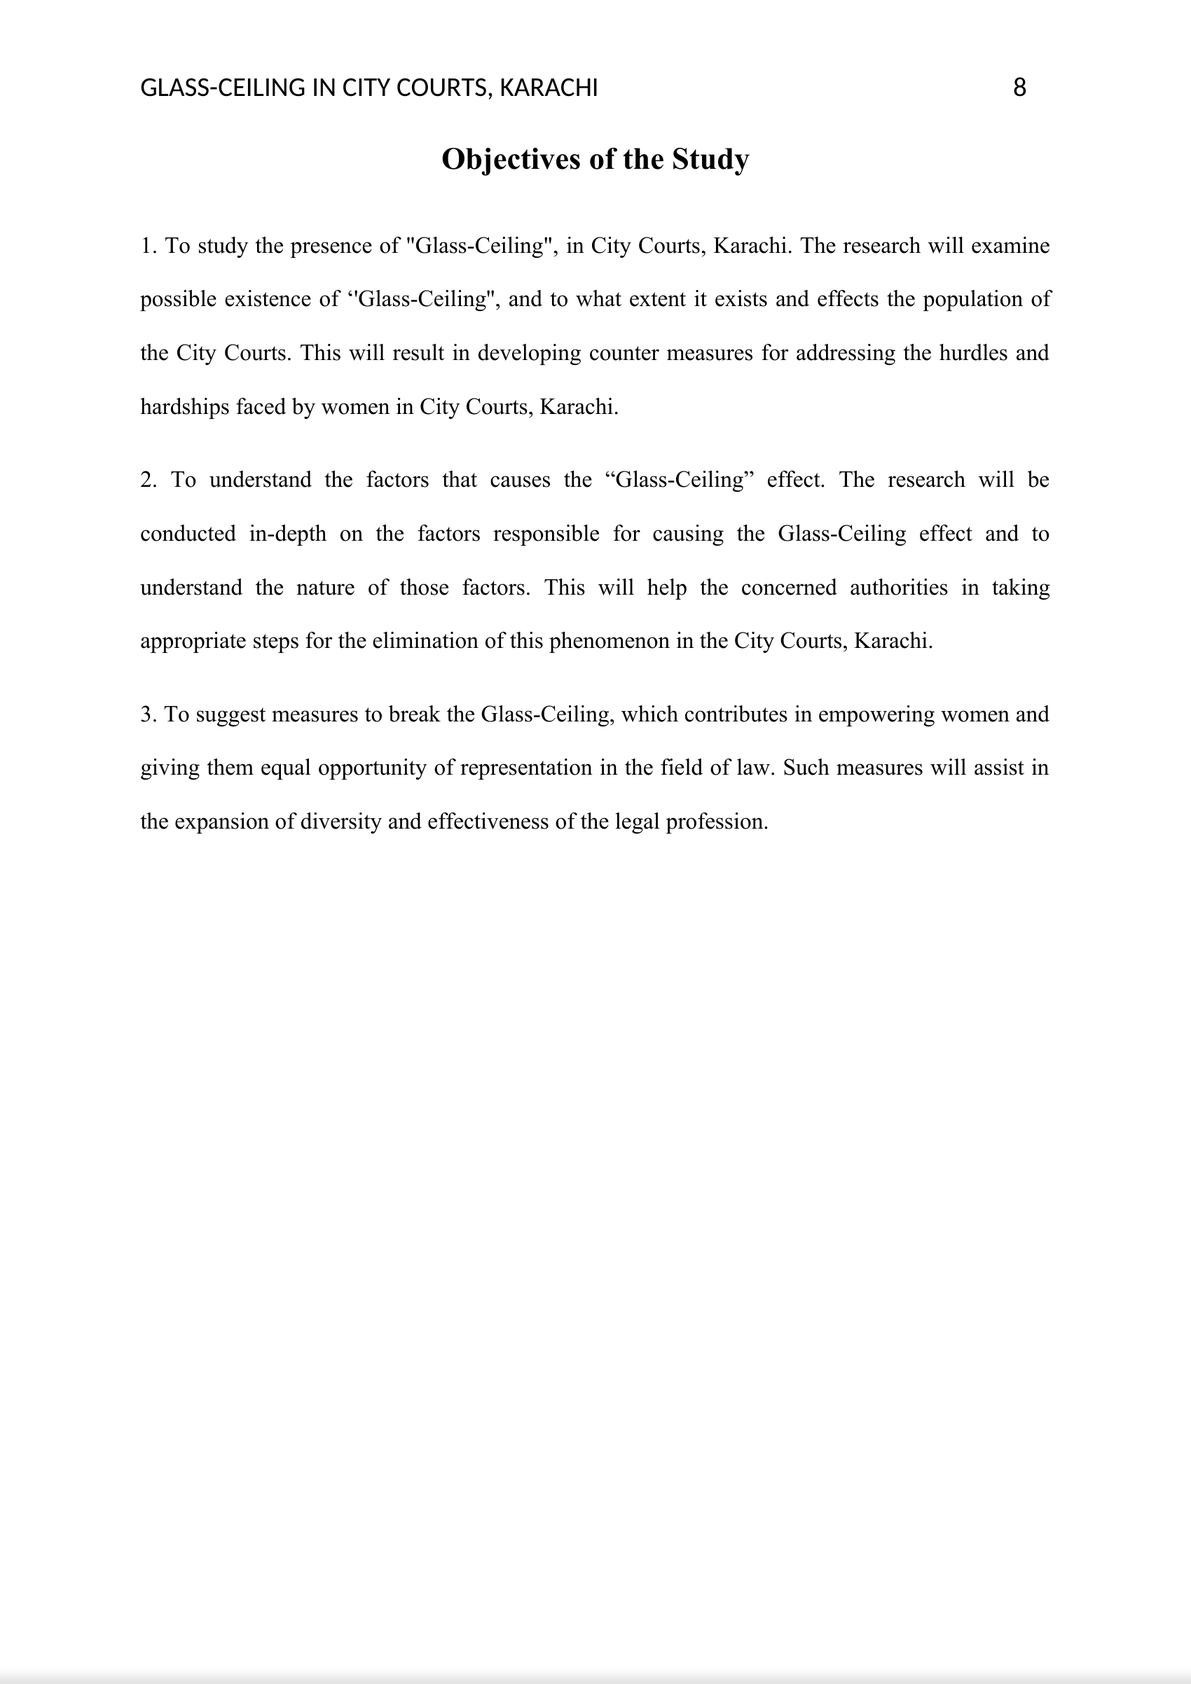 Research Paper - Existence of Glass-Ceiling in City Courts, Karachi-8